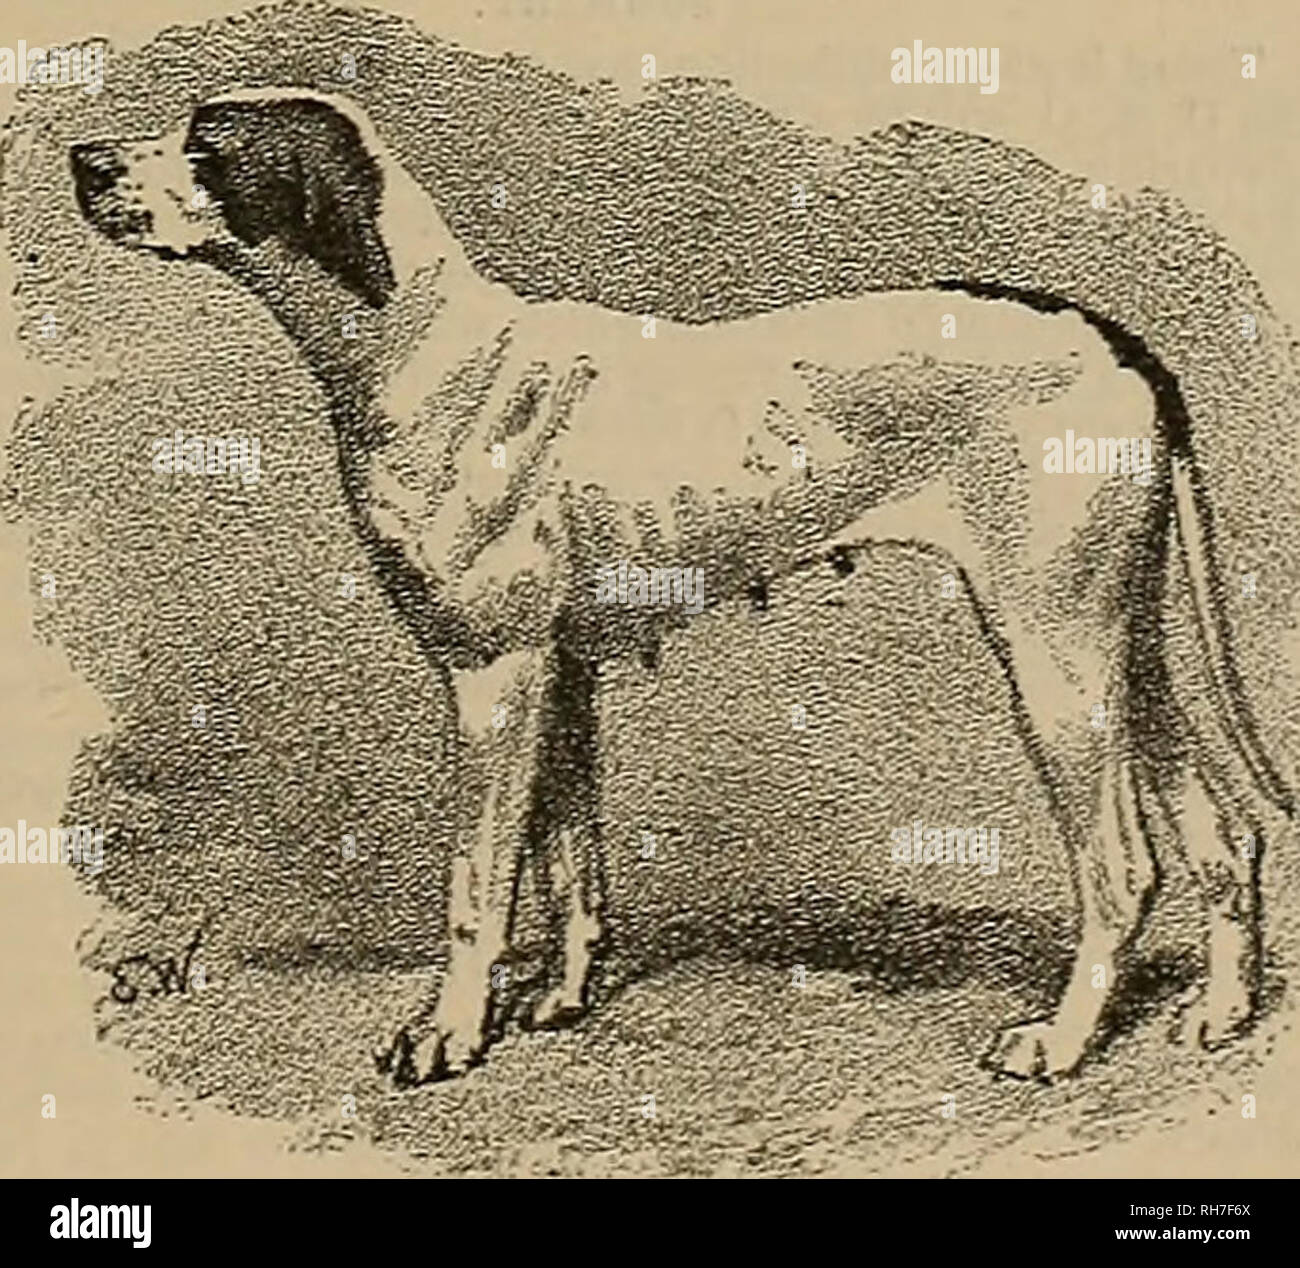 Breeder and sportsman. Horses. COCKER SPANIEL. BRONTA (17,063), DB. A. C.  DAVENPOBT, Owner Mr. H. F. Mann calls attention to an alleged error in the  announcement of the awards at the